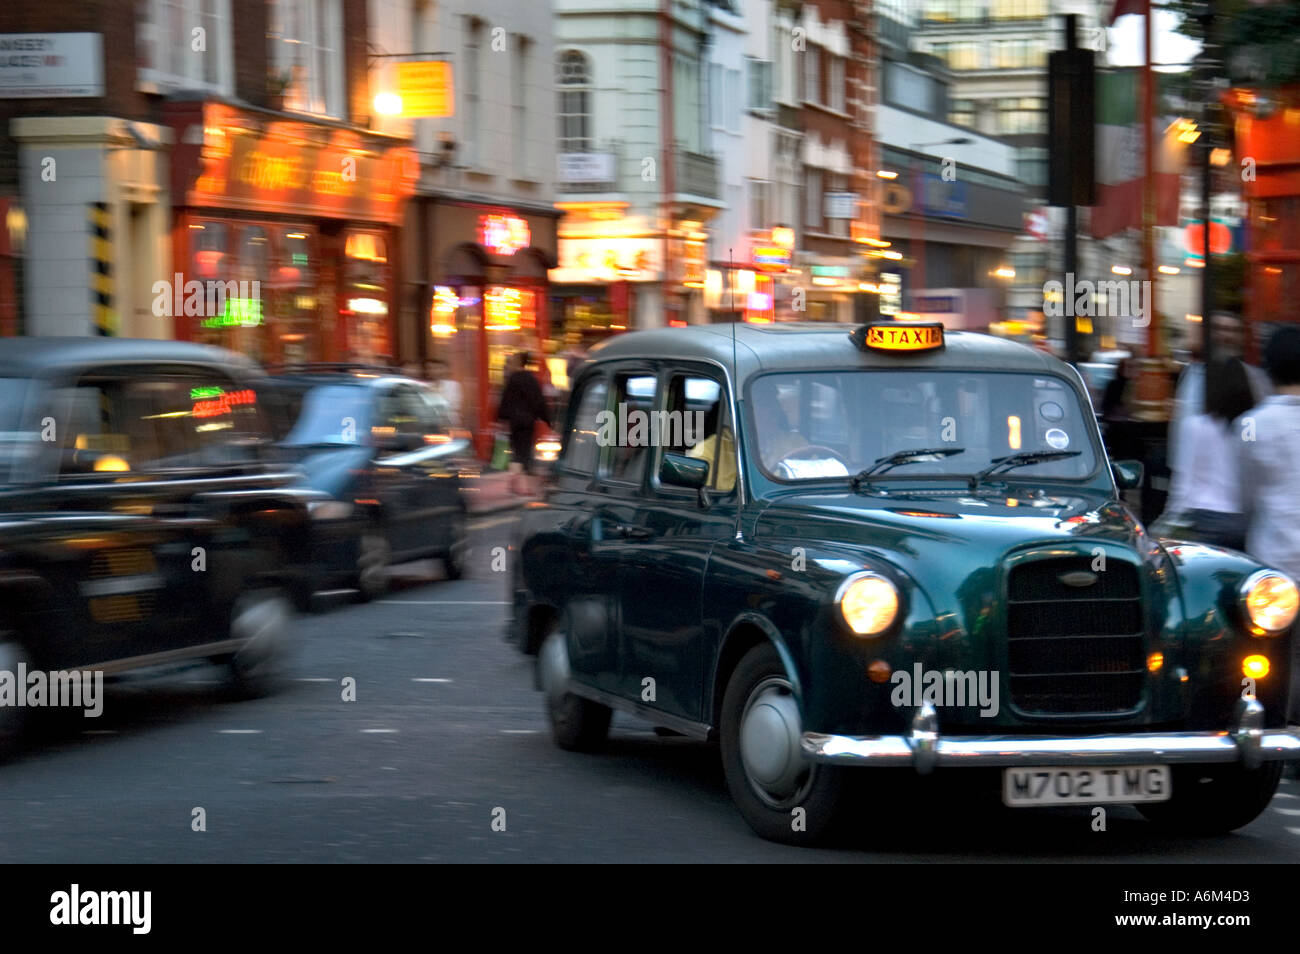 Black taxicabs Chinatown Soho Central London Stock Photo